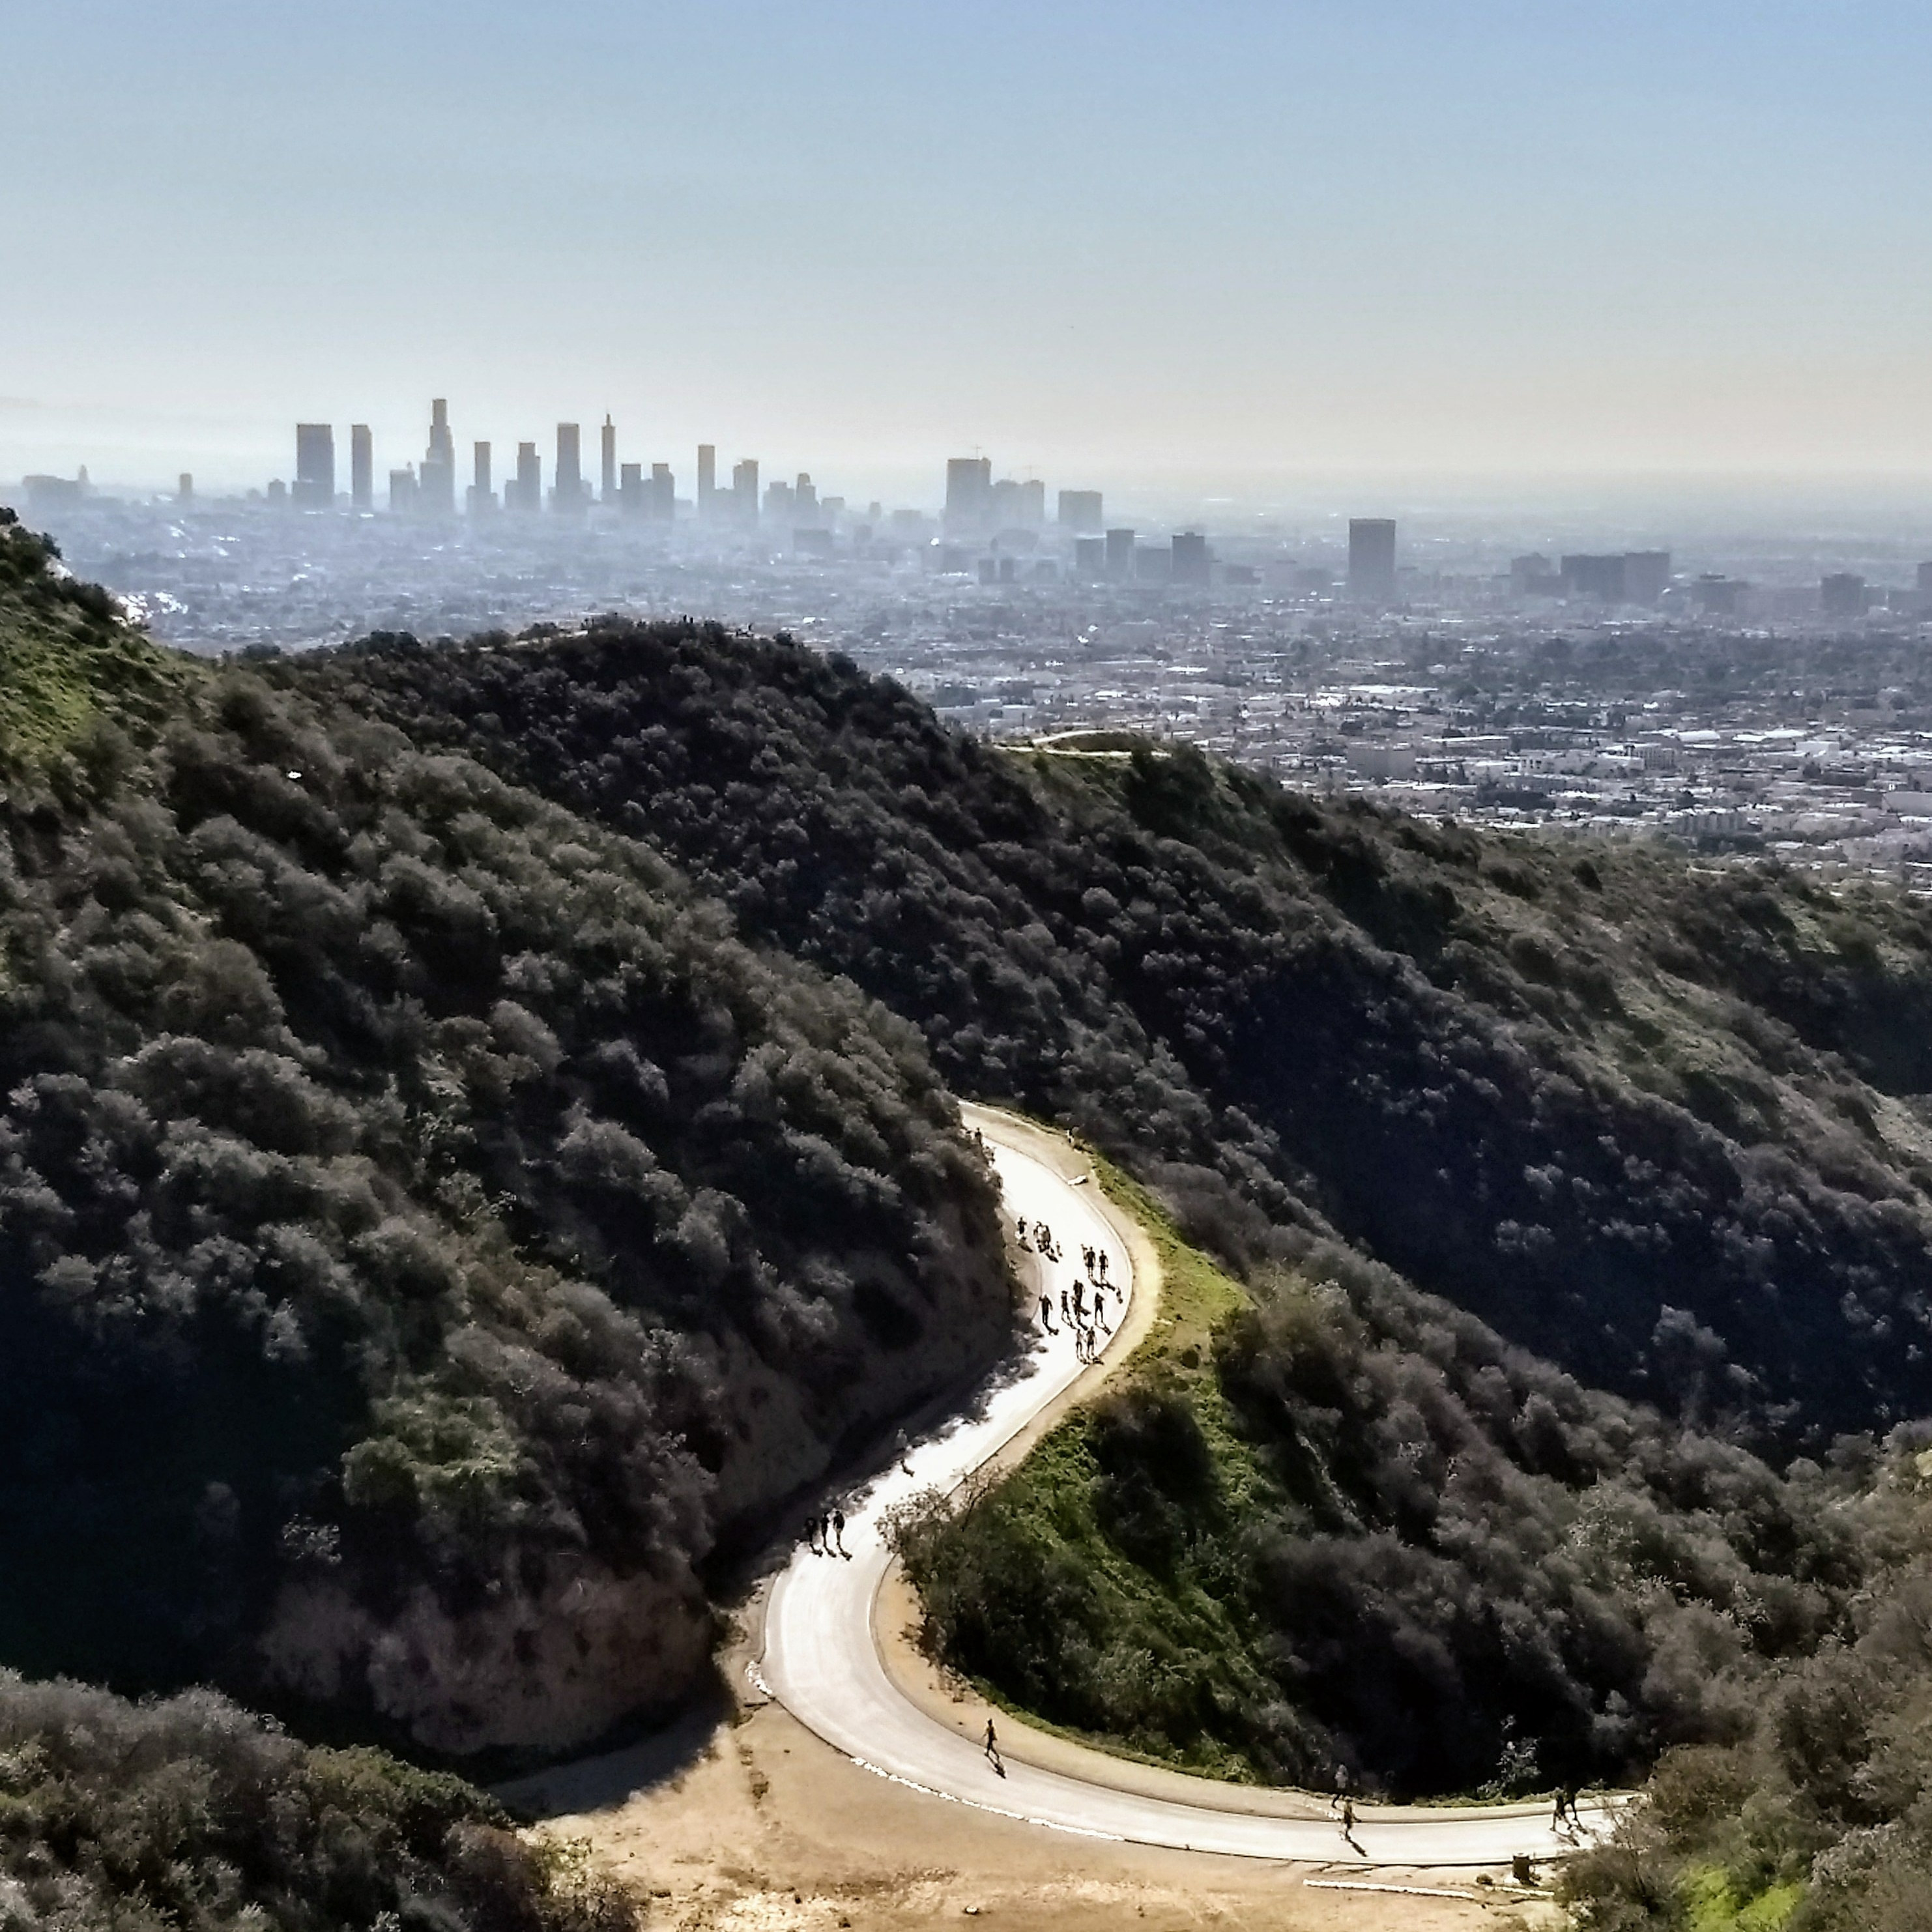 Downtown Los Angeles Skyline as seen from above forested Runyon Park.